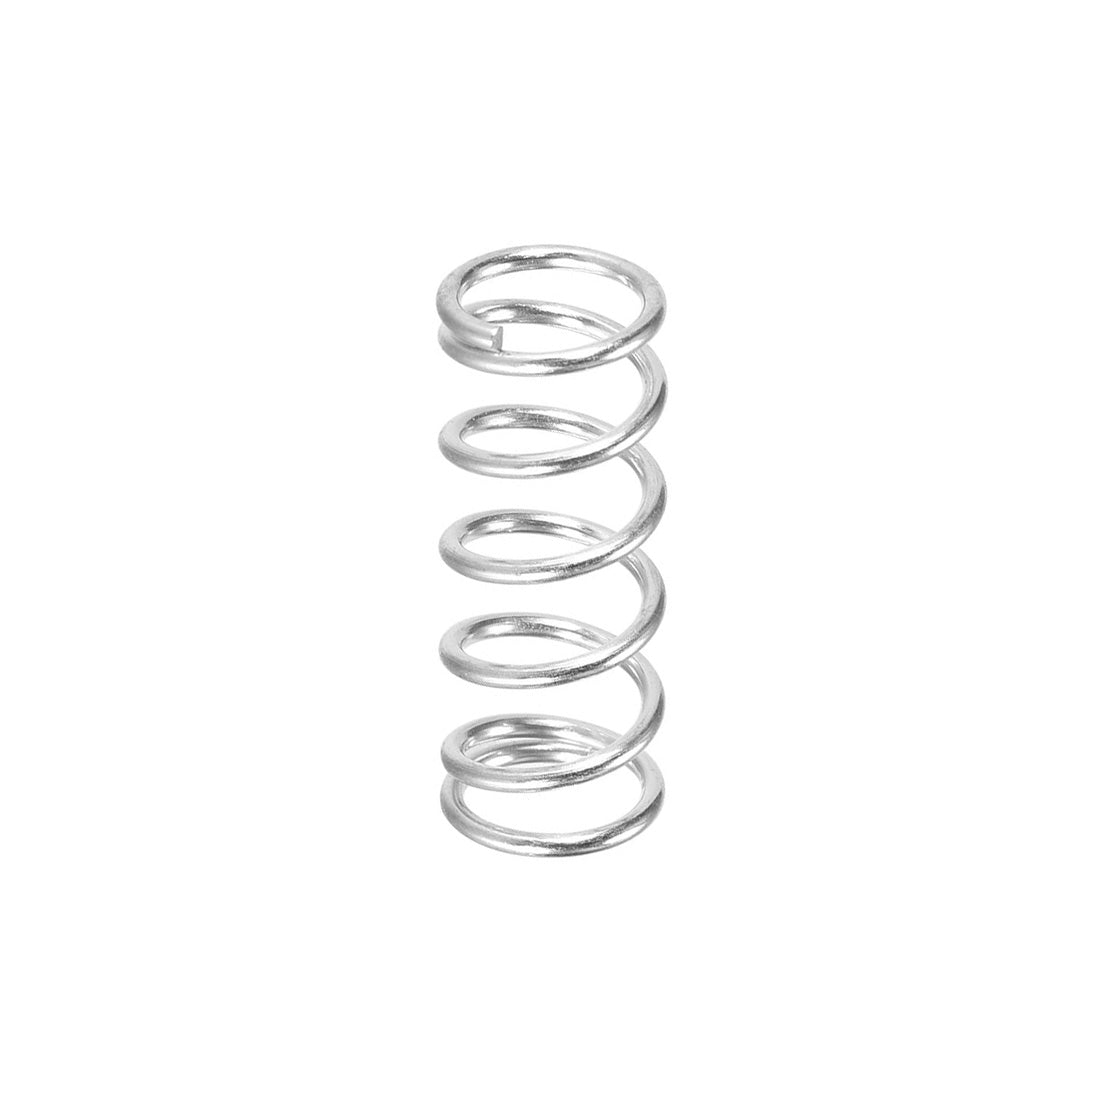 uxcell Uxcell Heated Bed Springs for 3D Printer Extruder Compression Spring, 9 x 22 mm 20pcs